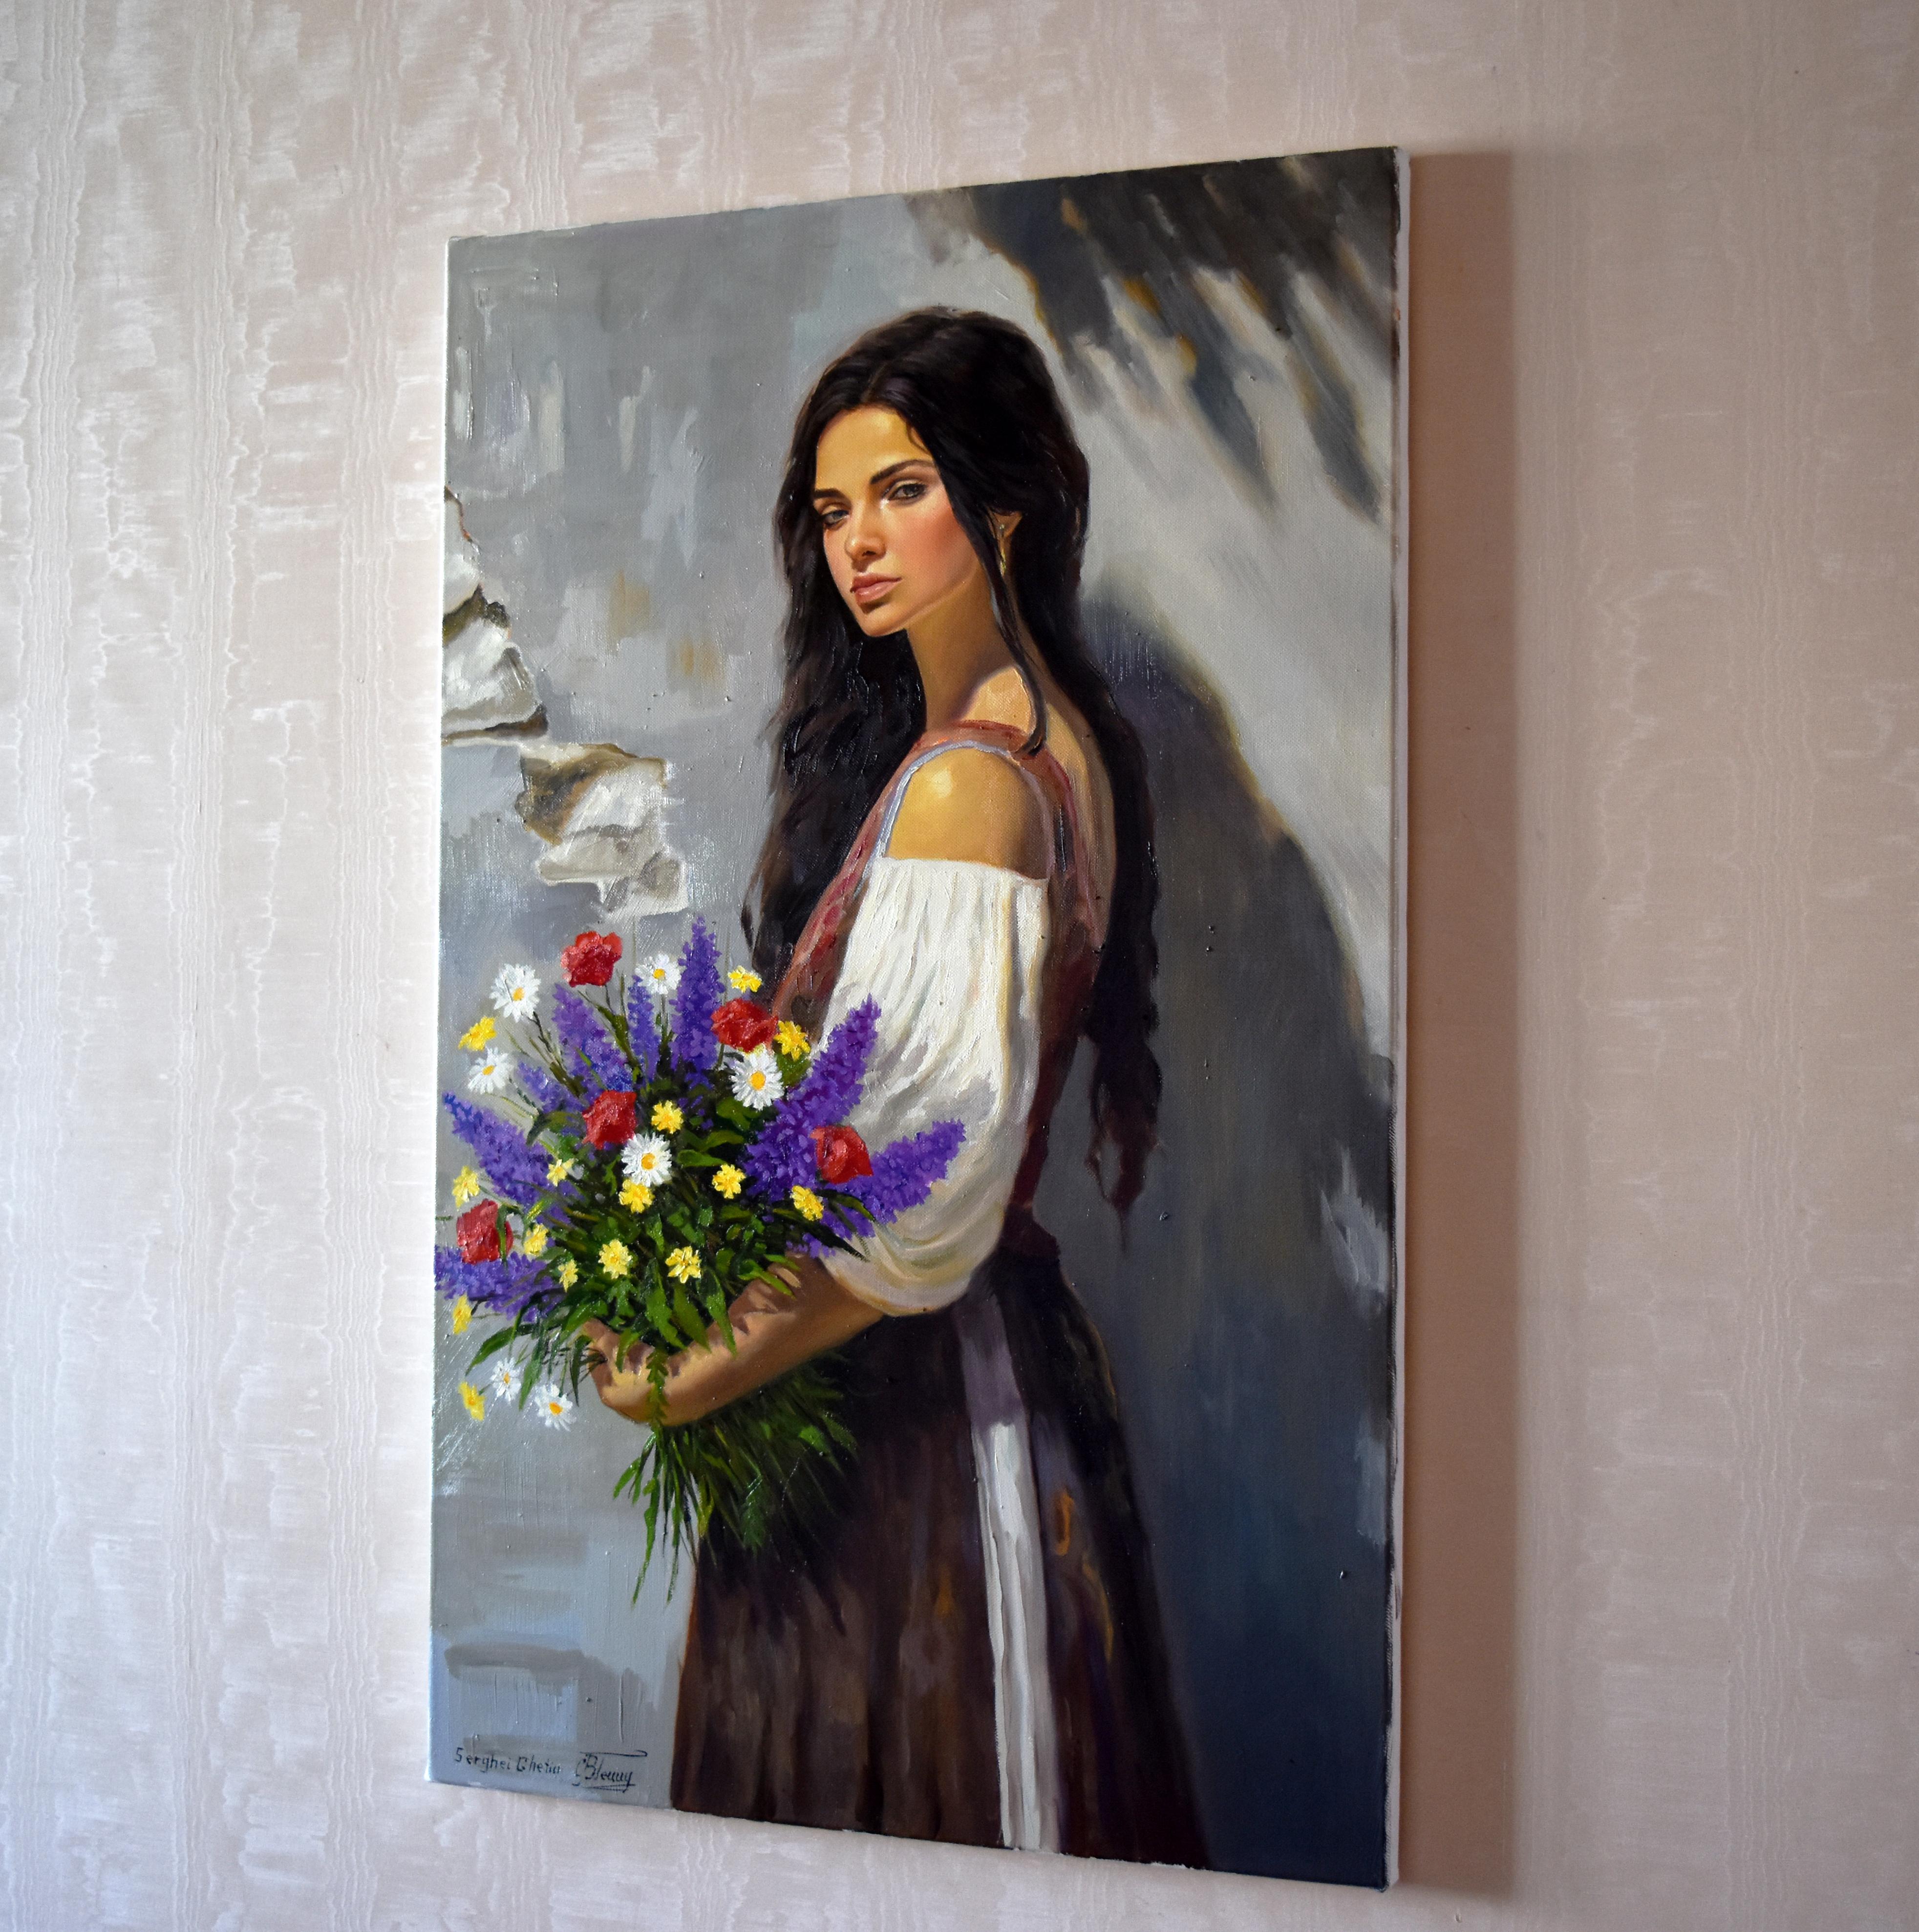 A portrait with wild flowers - Realist Painting by Serghei Ghetiu